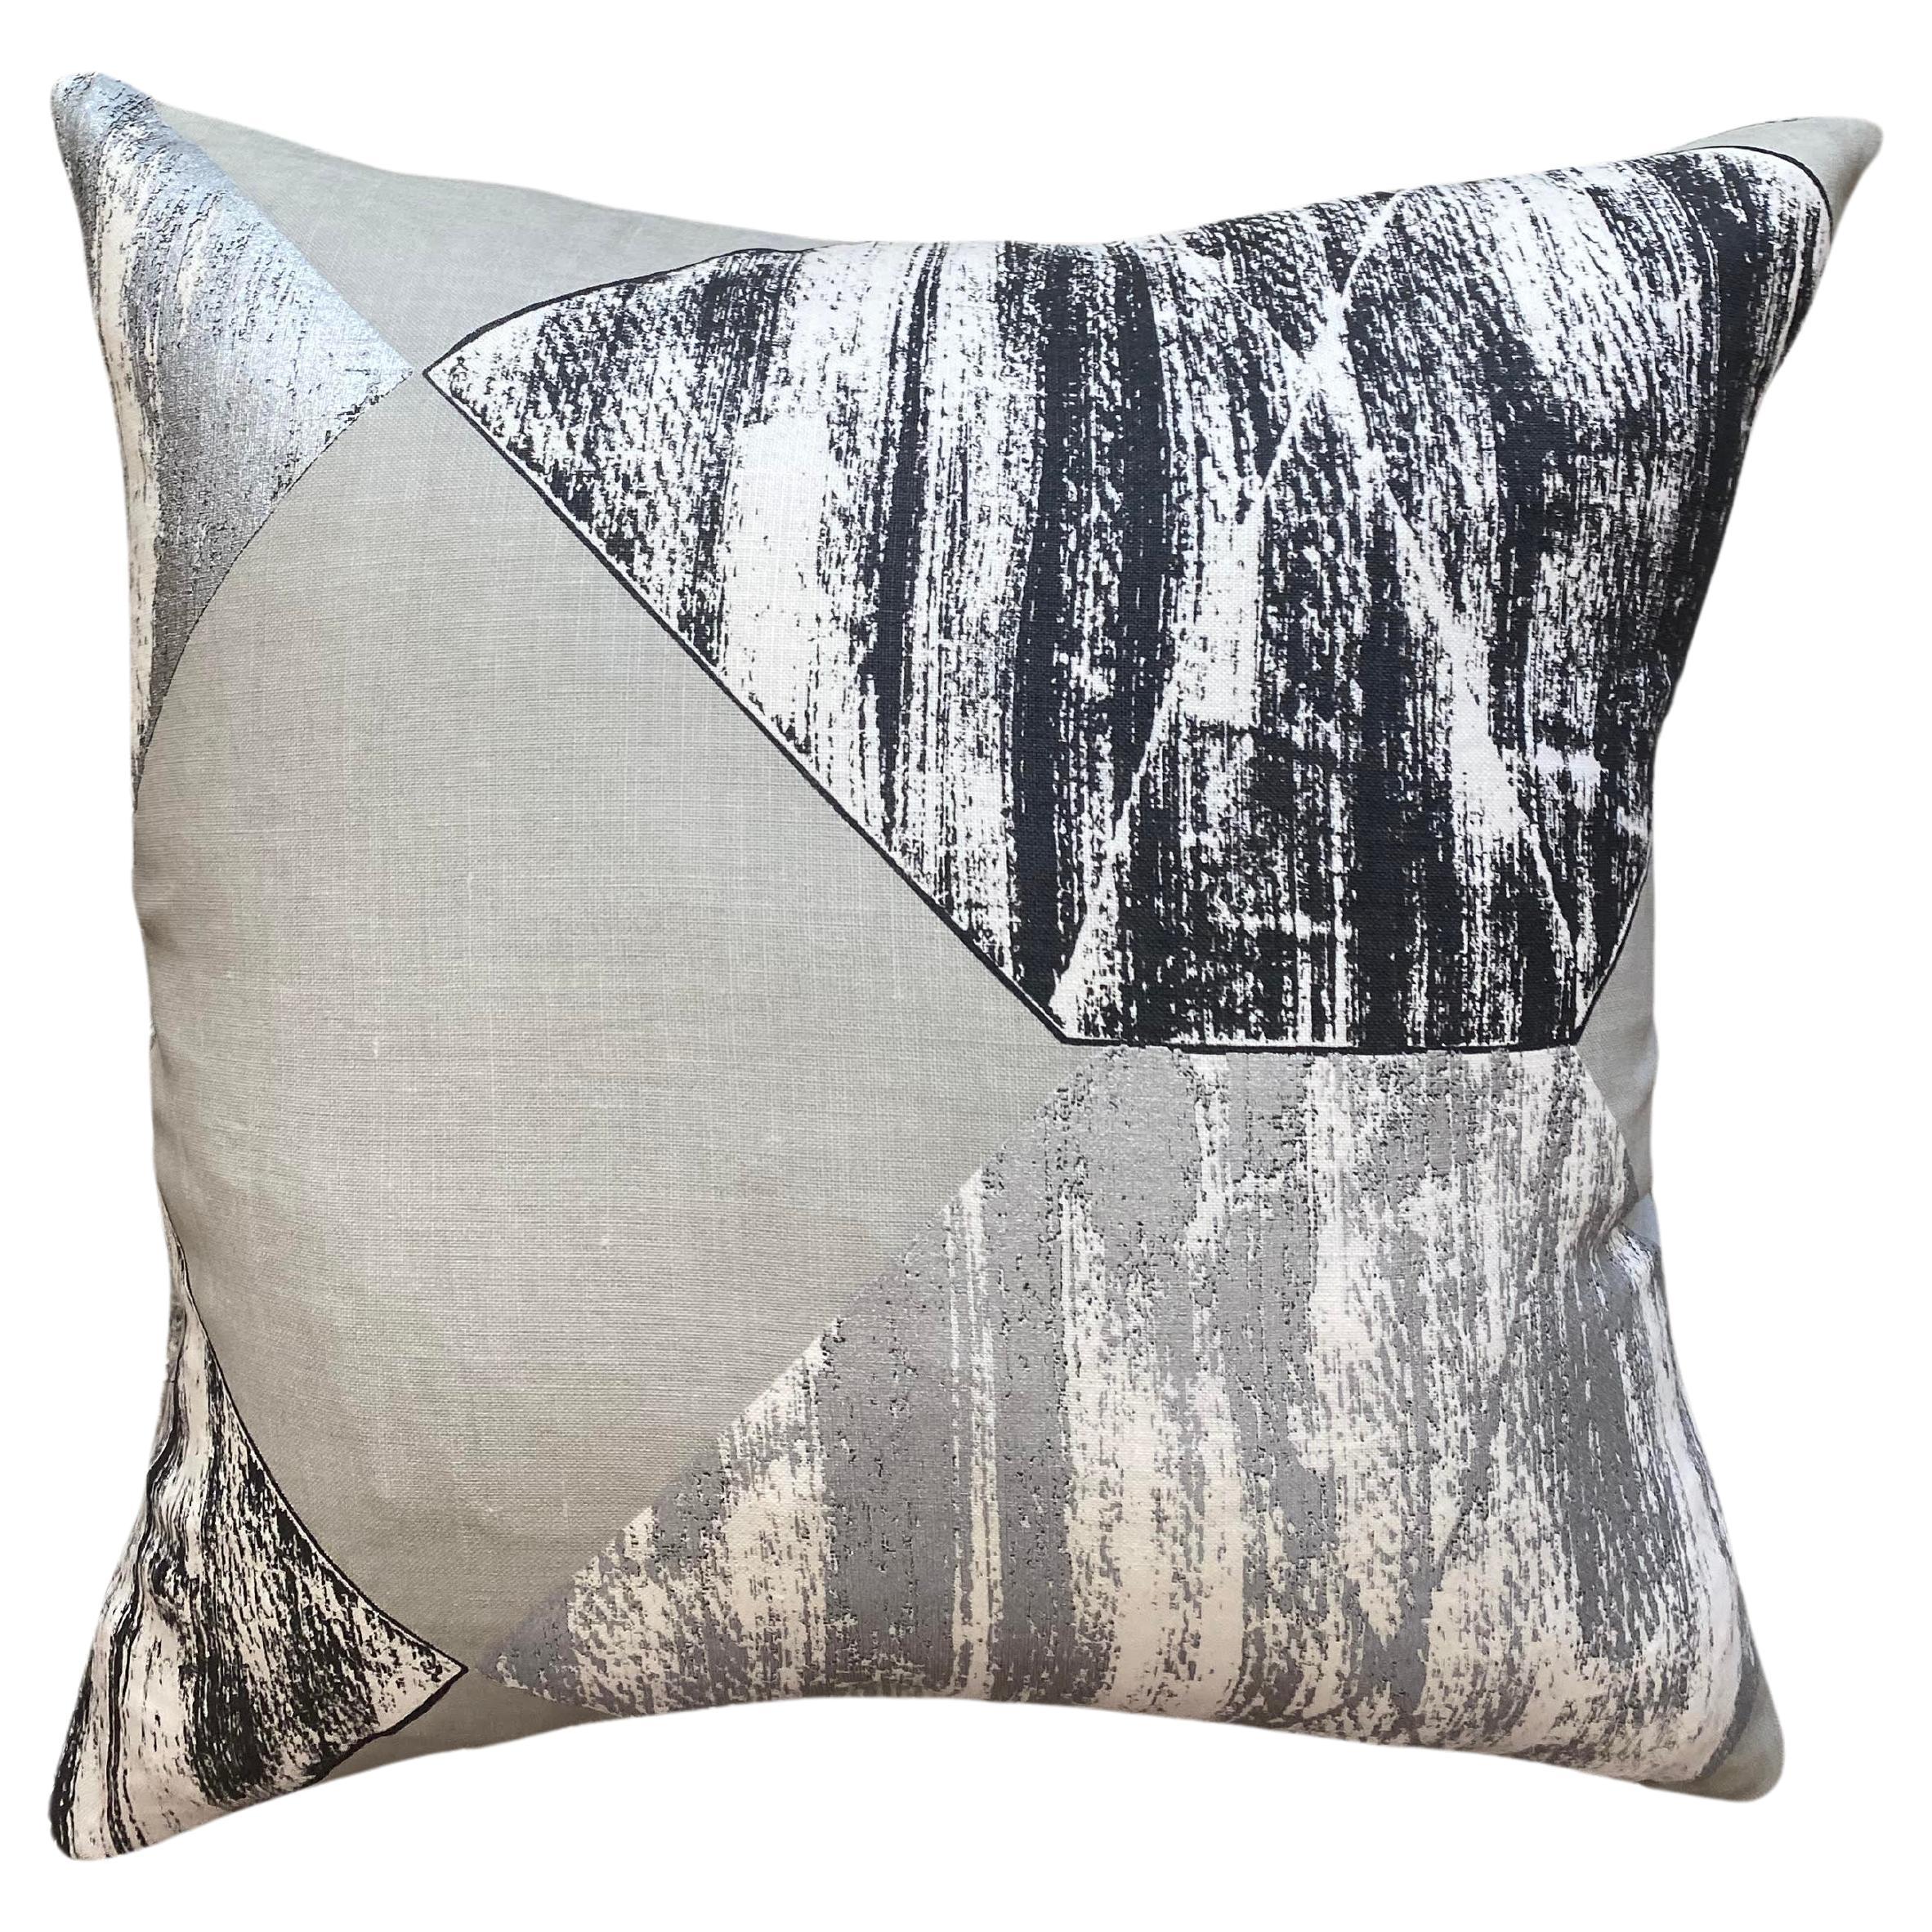 Linen Graphic Print in Grey, Black and Silver 